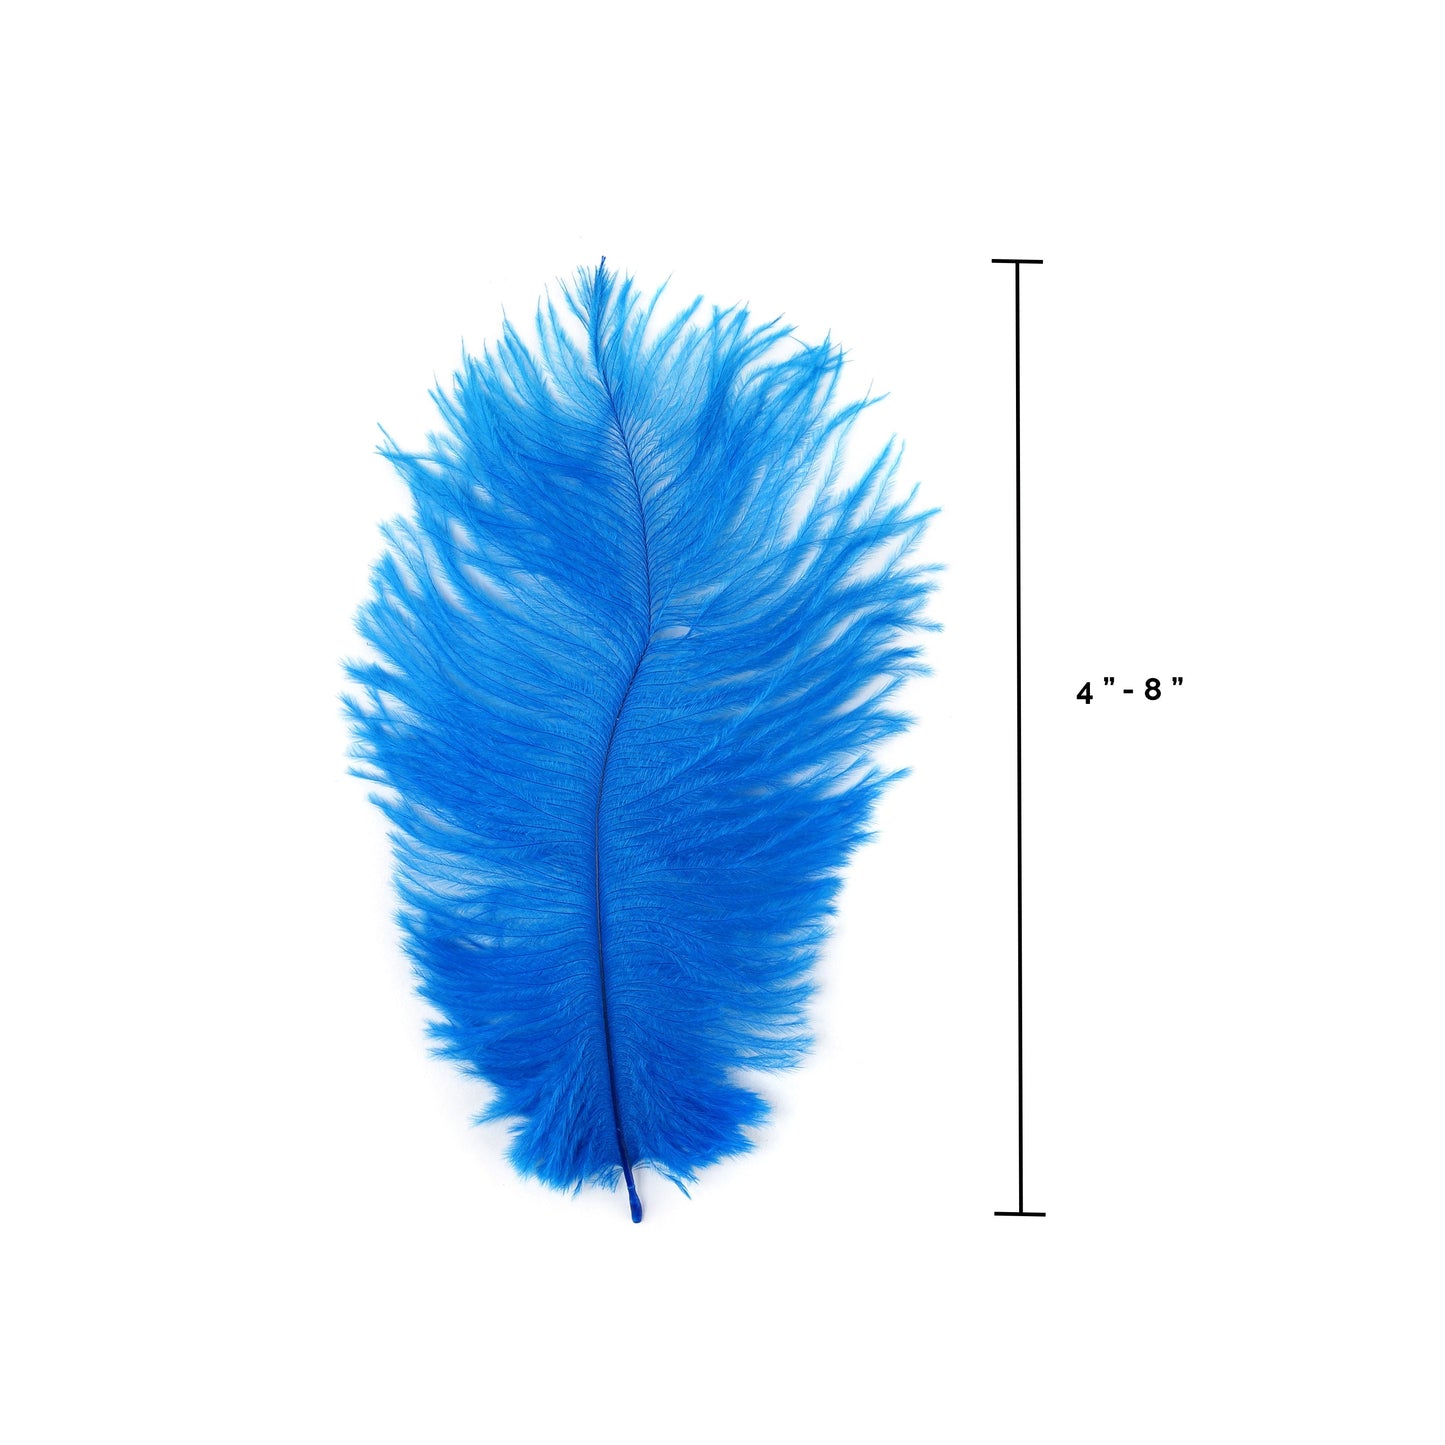 Ostrich Feathers 4-8" Drabs - Dark Turquoise